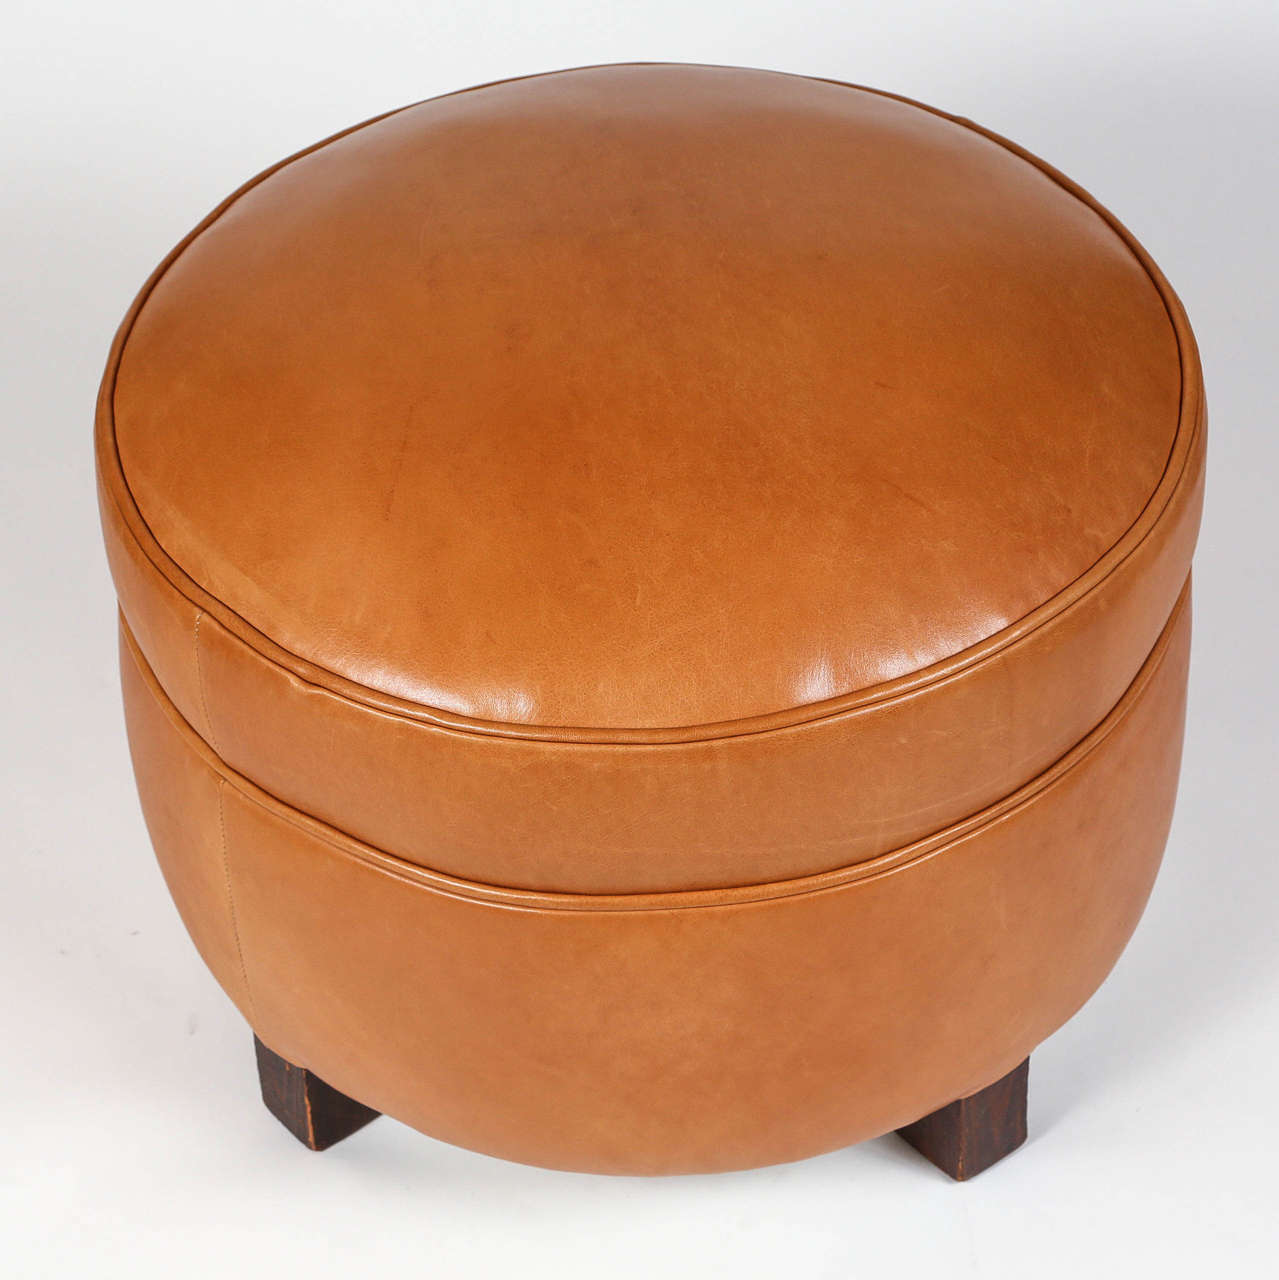 Vintage ottoman, newly upholstered in tan leather with distressed wood legs